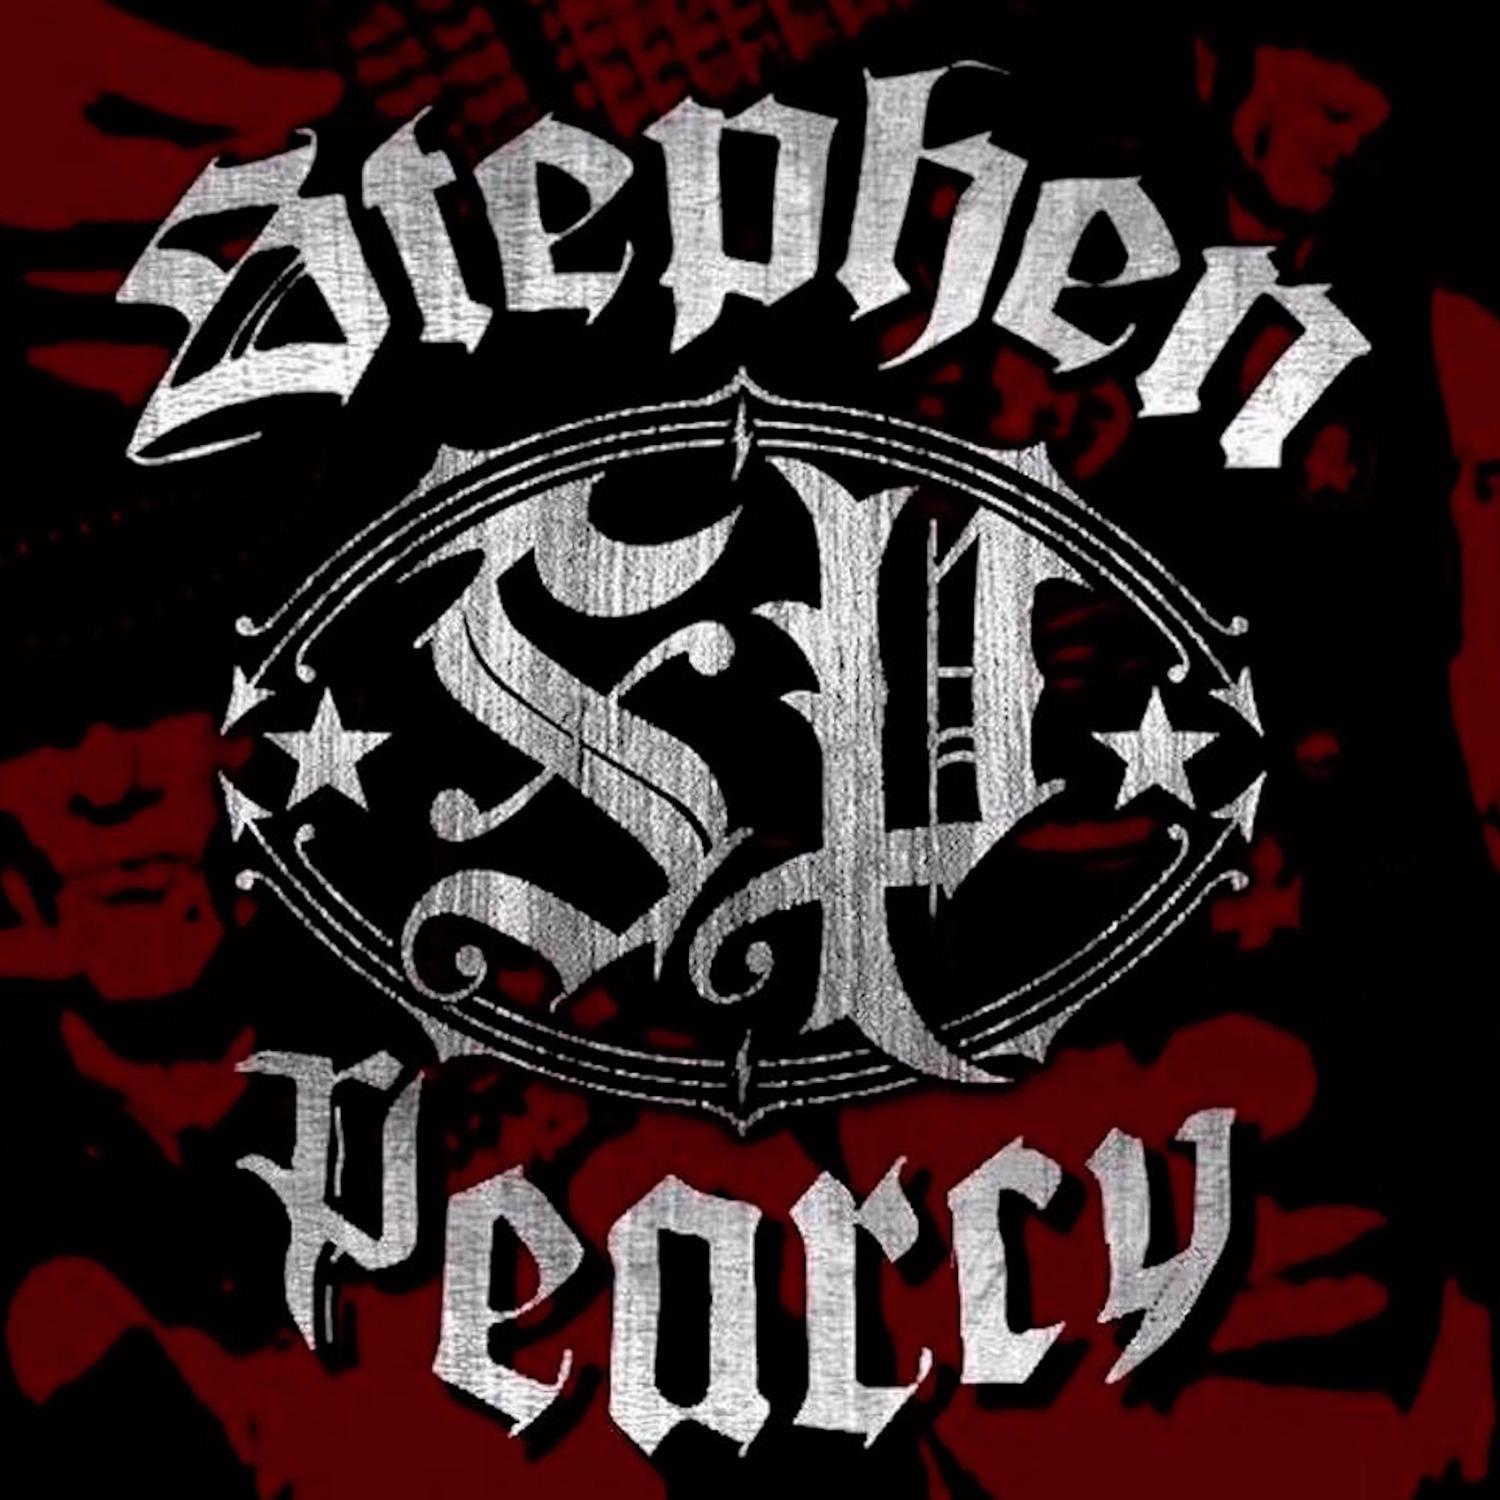 Stephen Pearcy - So Good, so Bad (Live 83)